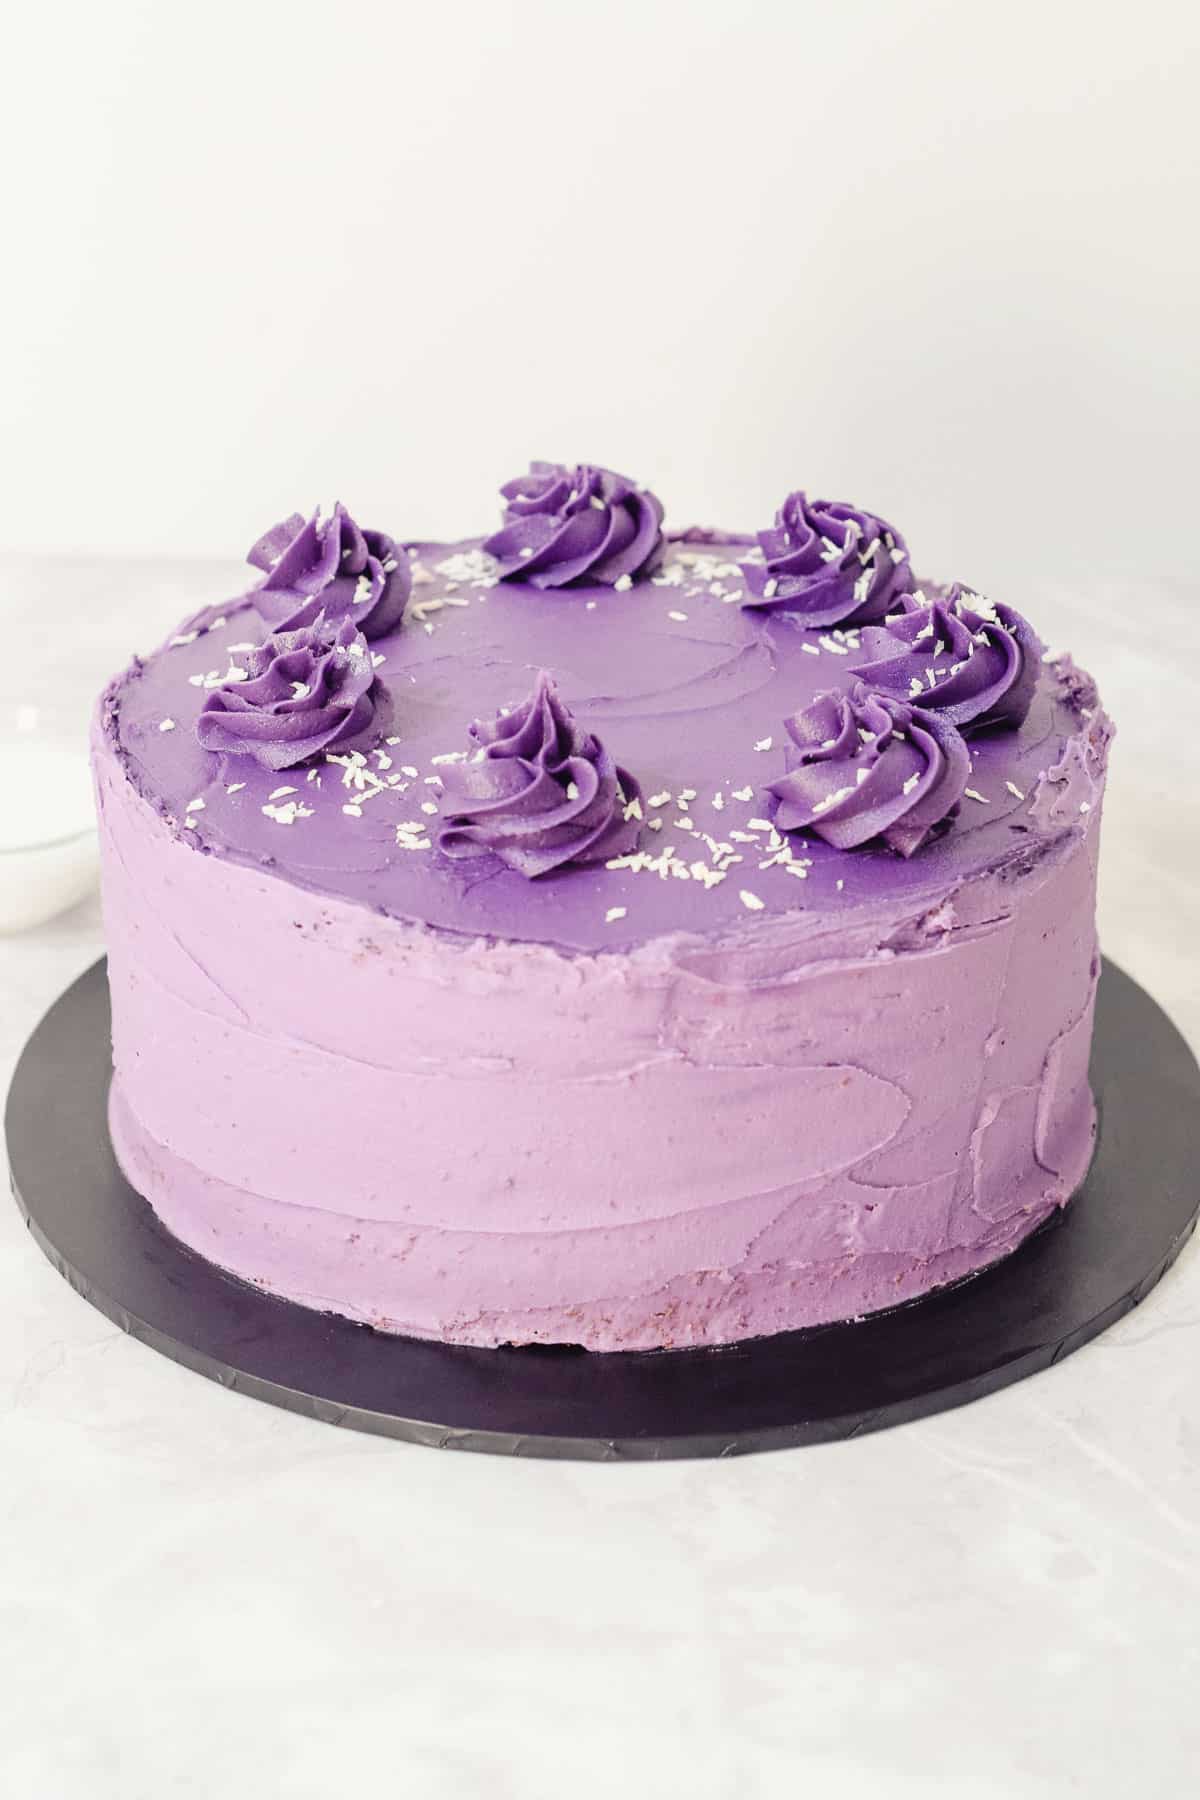 purple yam ube sponge cake with purple ube frosting and shredded coconut topping.